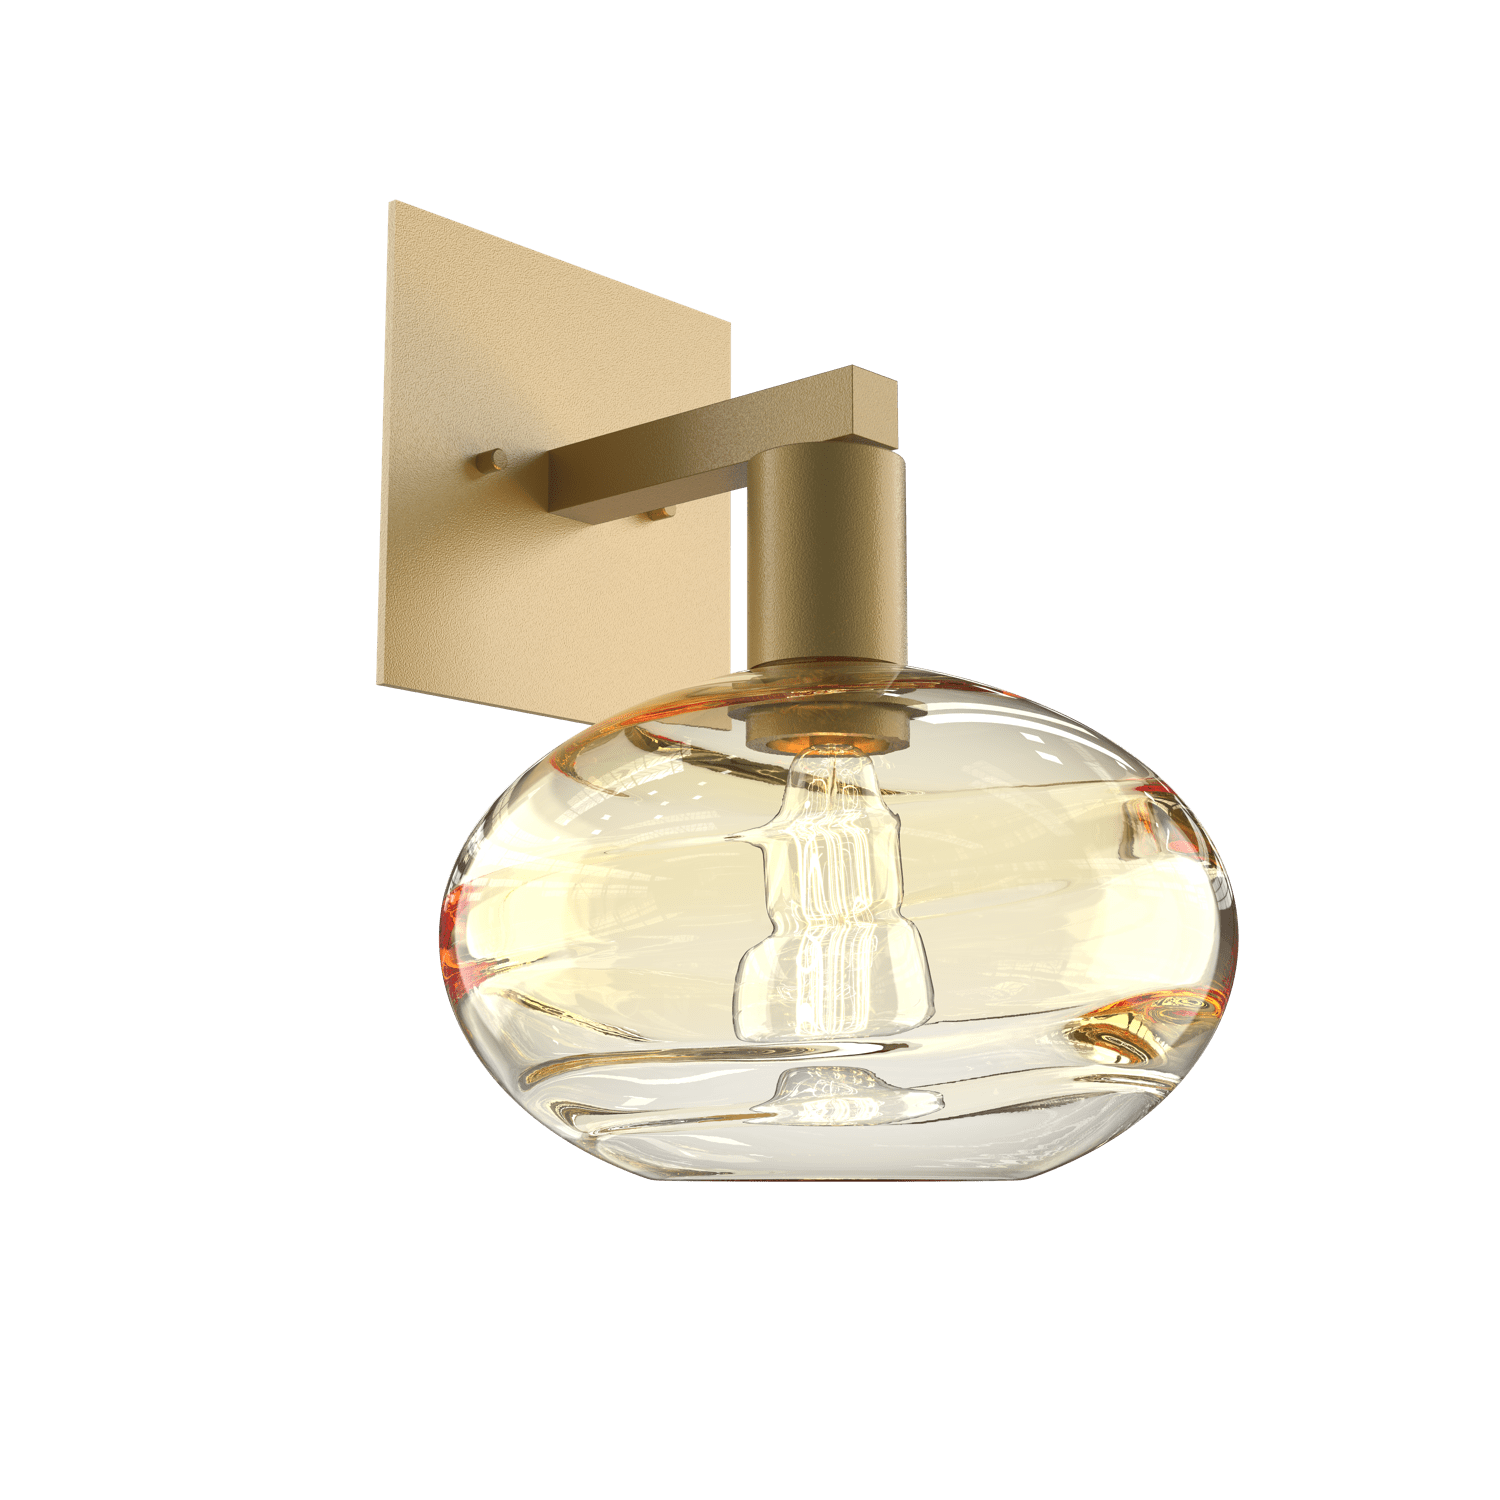 IDB0036-11-GB-OA-Hammerton-Studio-Optic-Blown-Glass-Coppa-wall-sconce-with-gilded-brass-finish-and-optic-amber-blown-glass-shades-and-incandescent-lamping